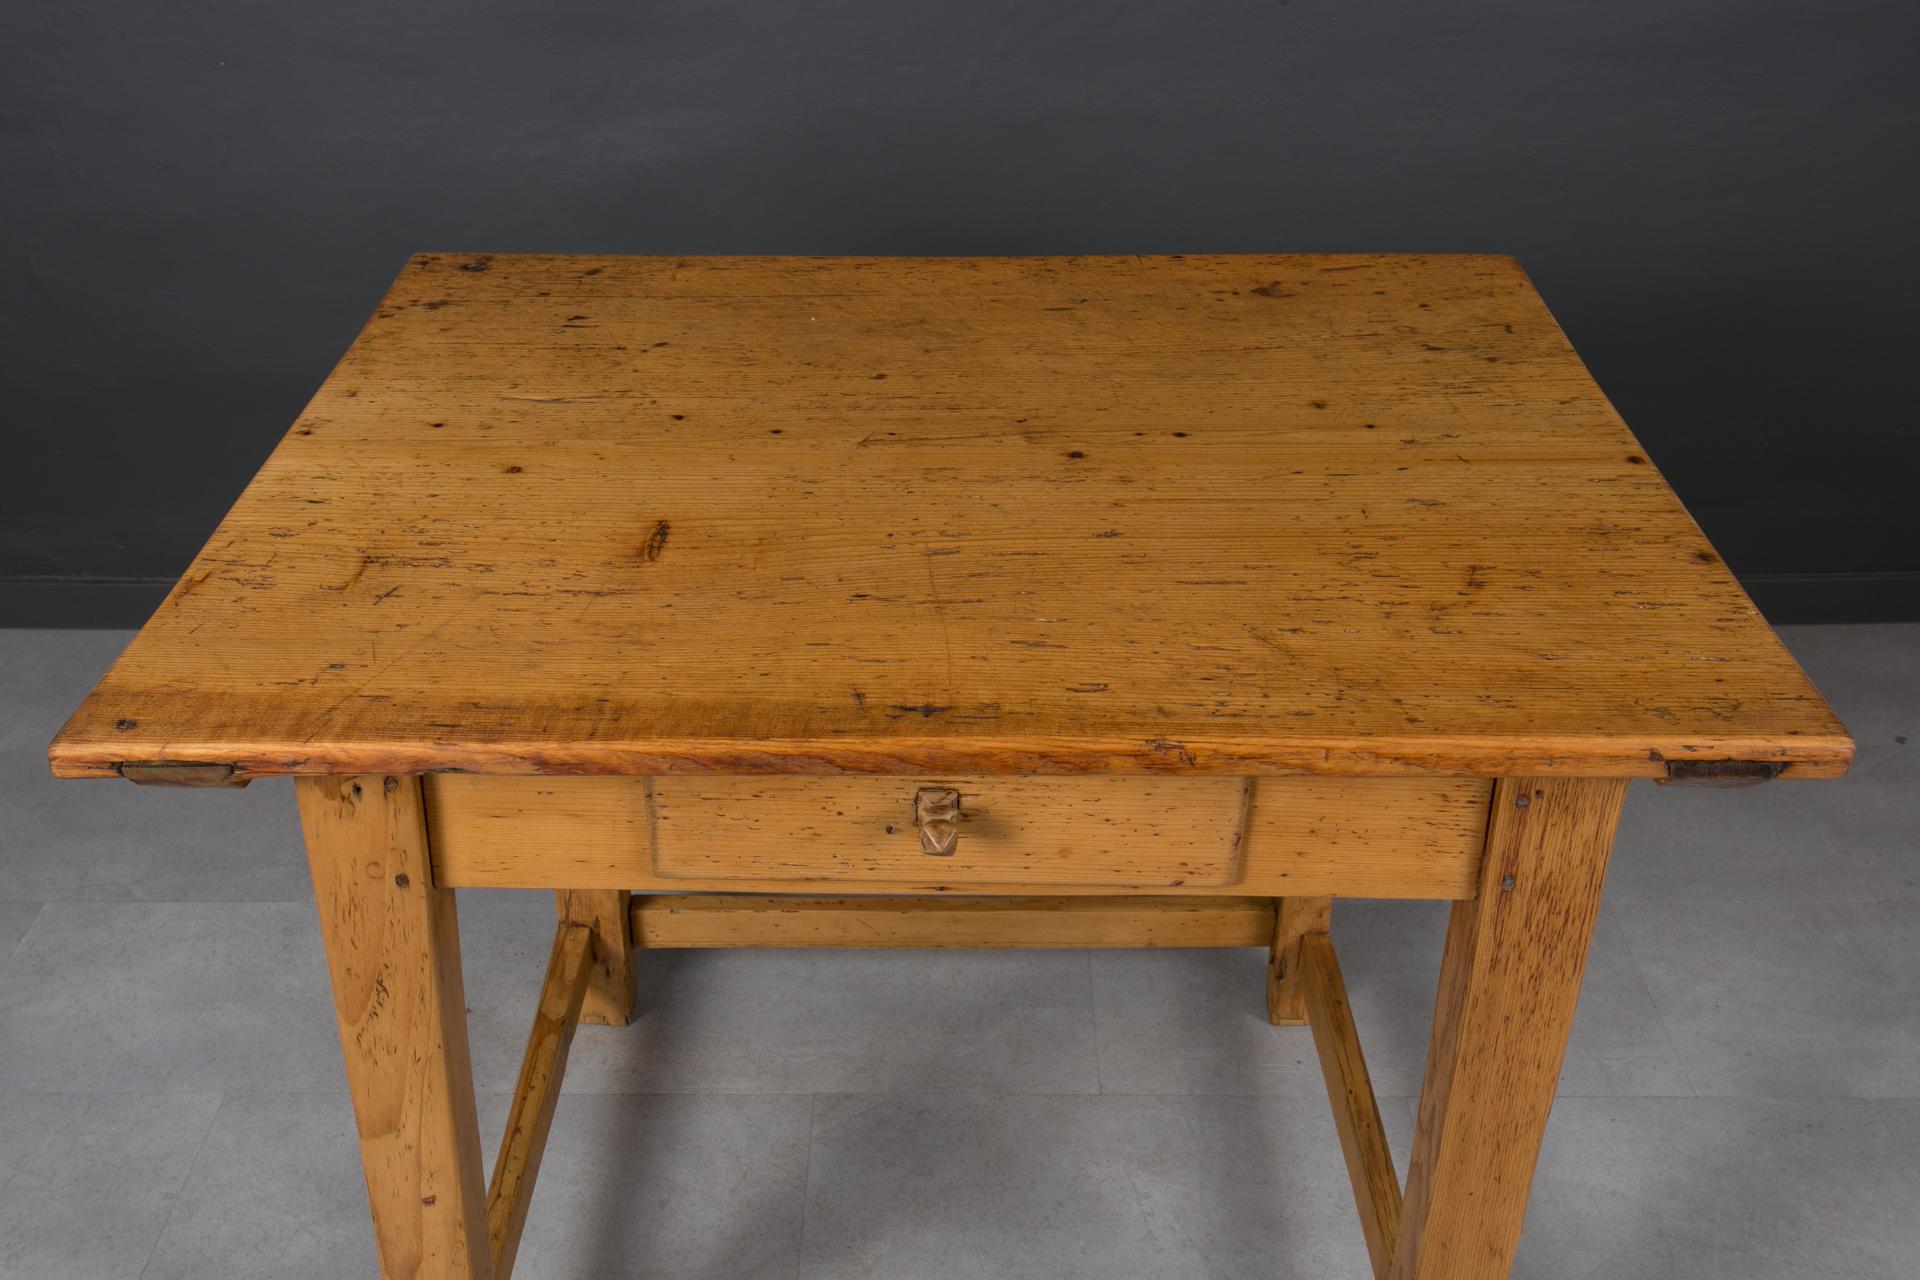 Vintage Pine Wood Table, Rustic Style, Prep or Dining Table, Kitchen Island For Sale 5